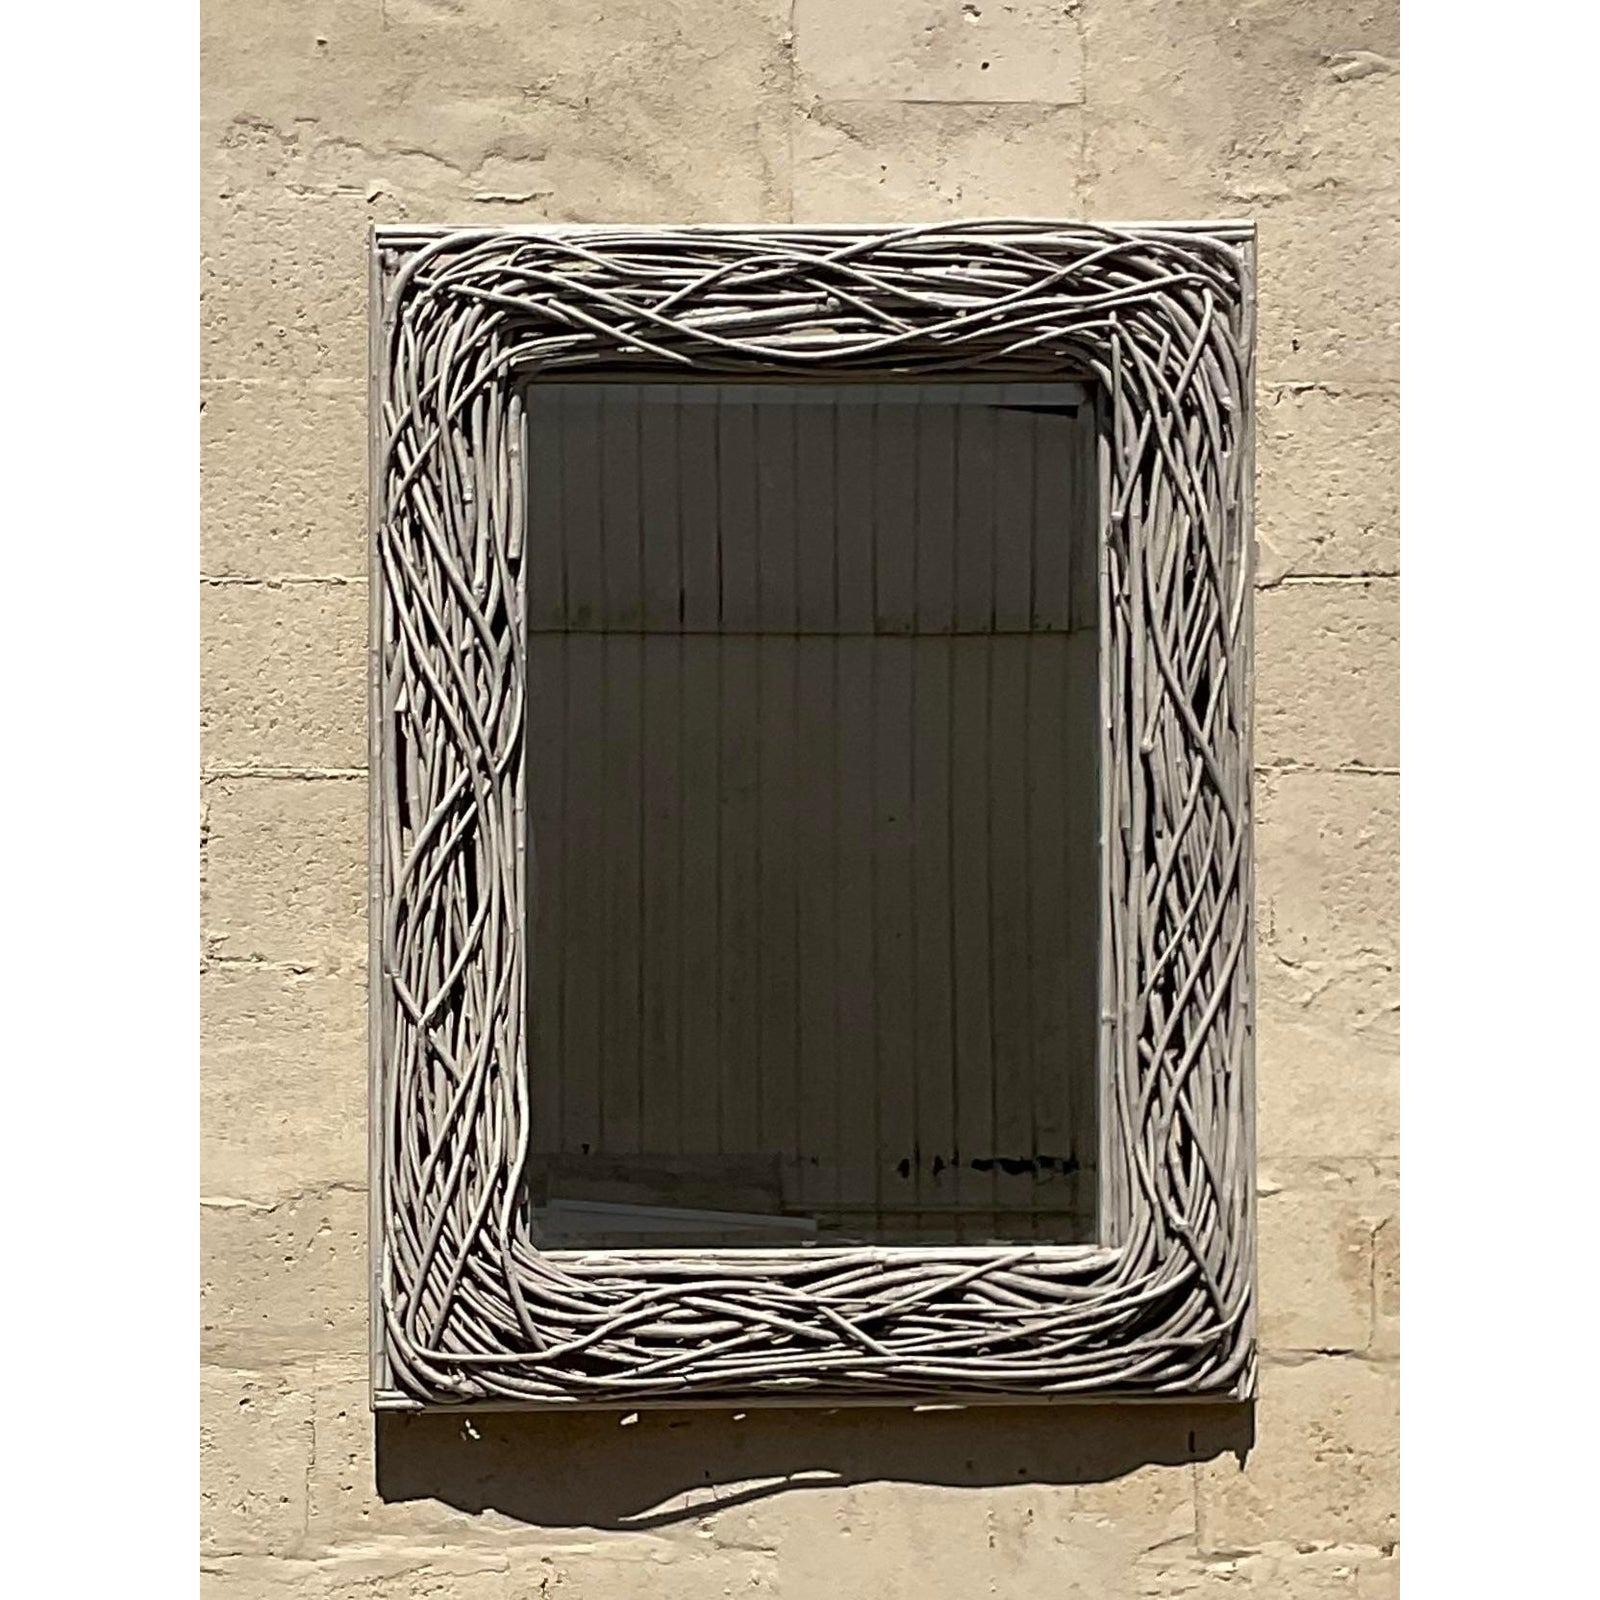 Vintage Boho Rustic mirror. A chic series of woven twigs in a pale grey finish. Acquired from a Palm Beach estate.